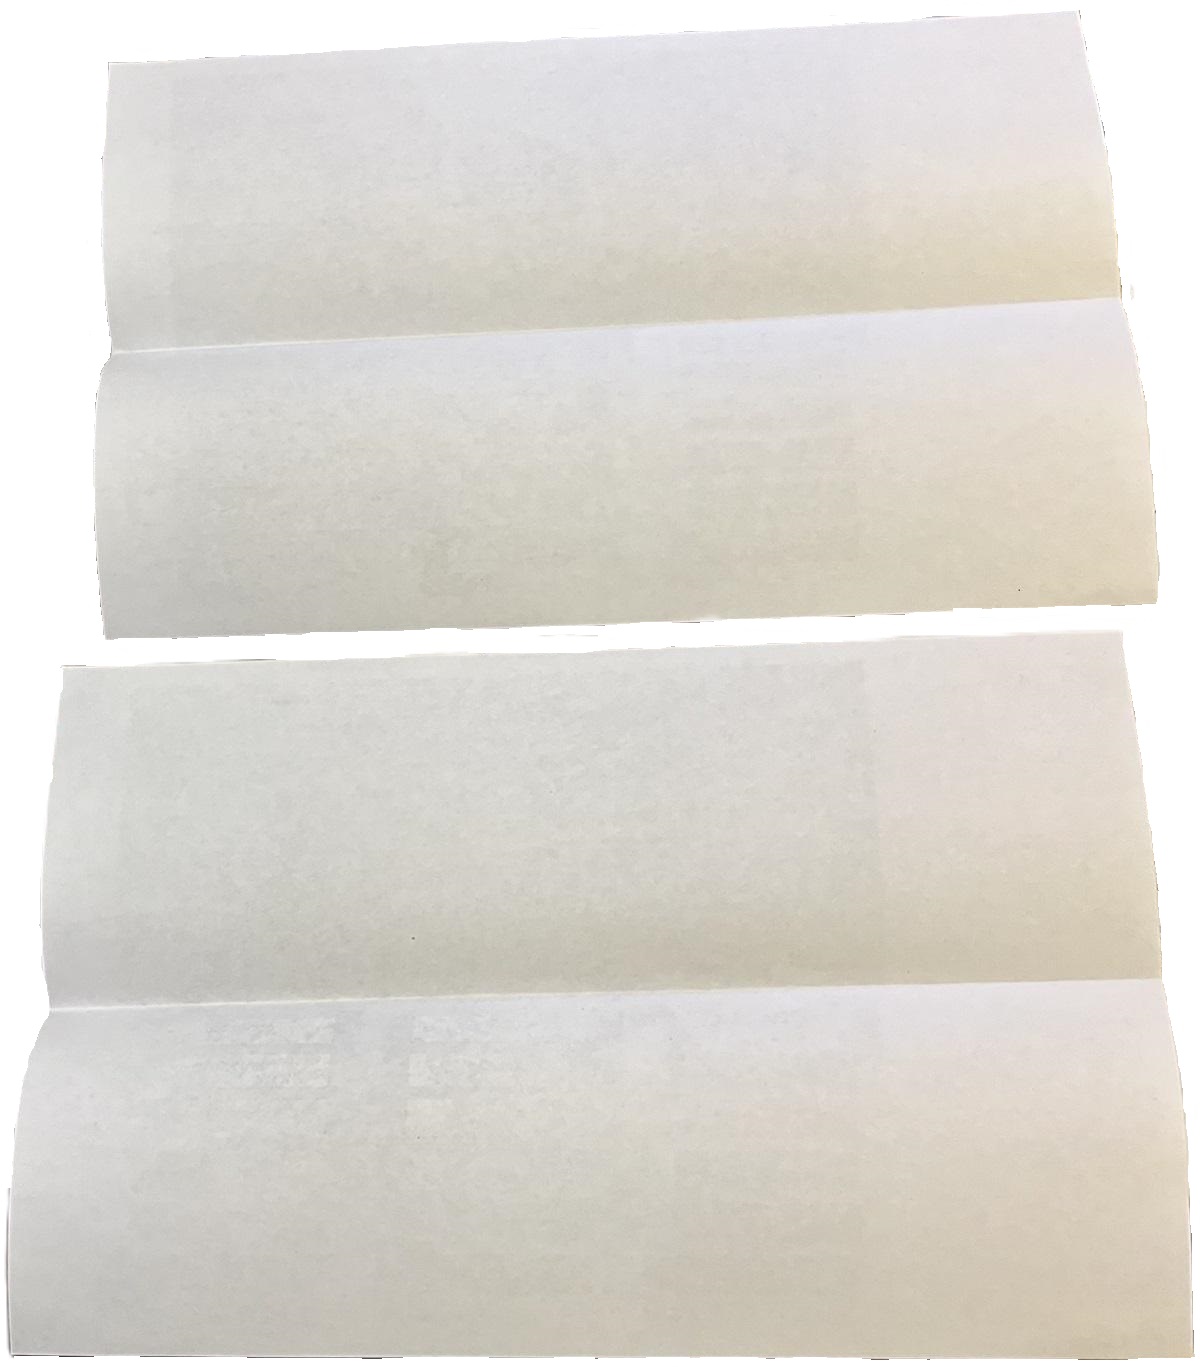 Spray glue on the inside of the paper